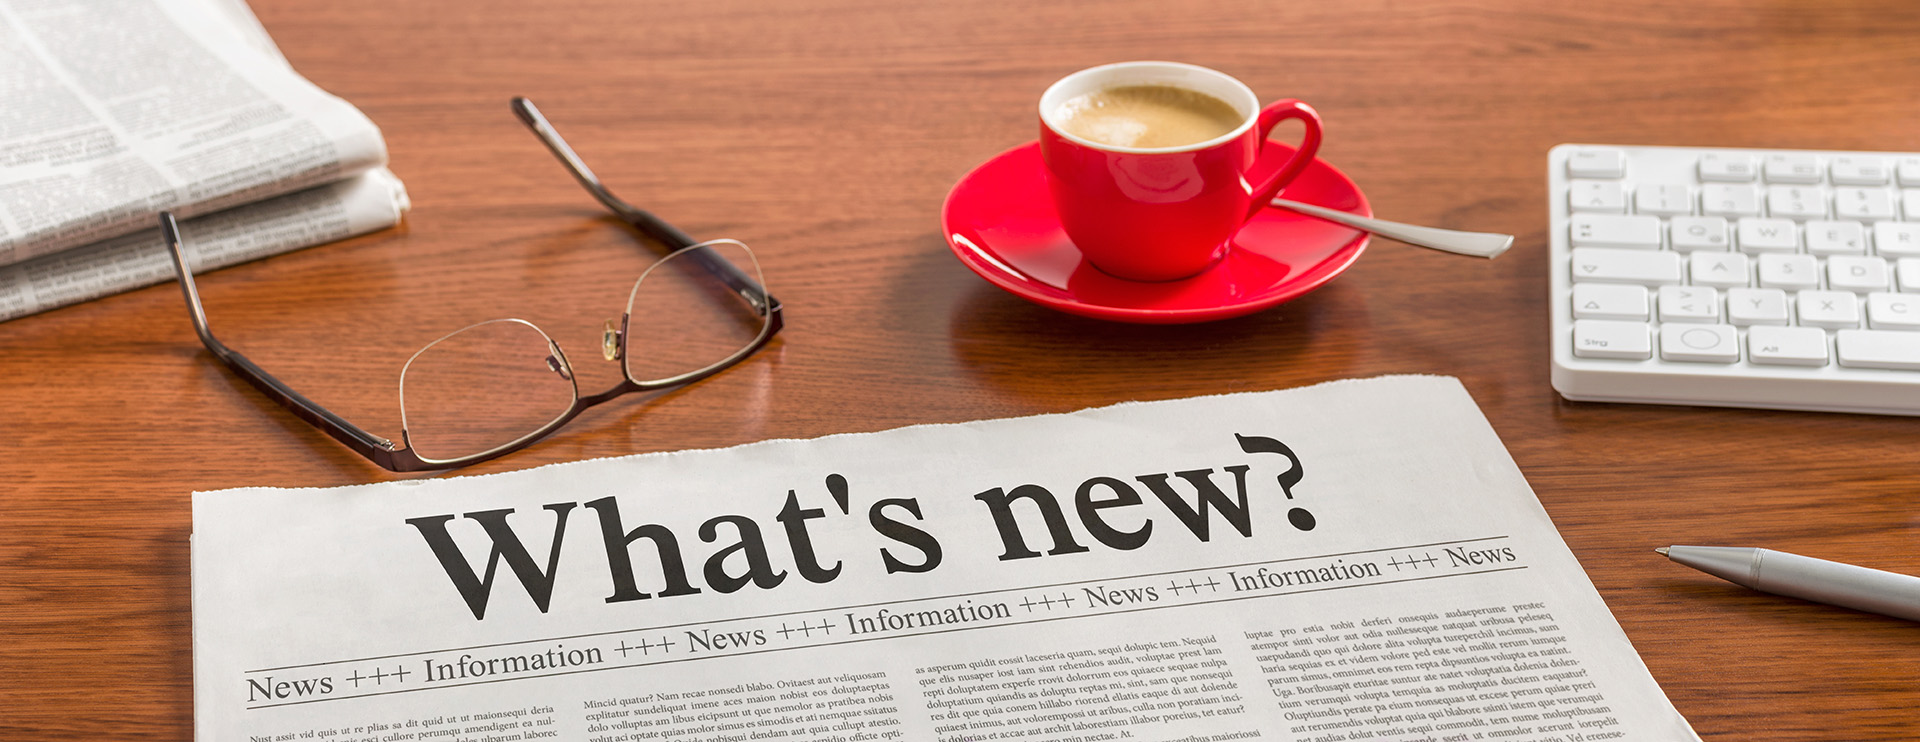 Newspaper heading of "What's new" with reading glasses and coffee cup